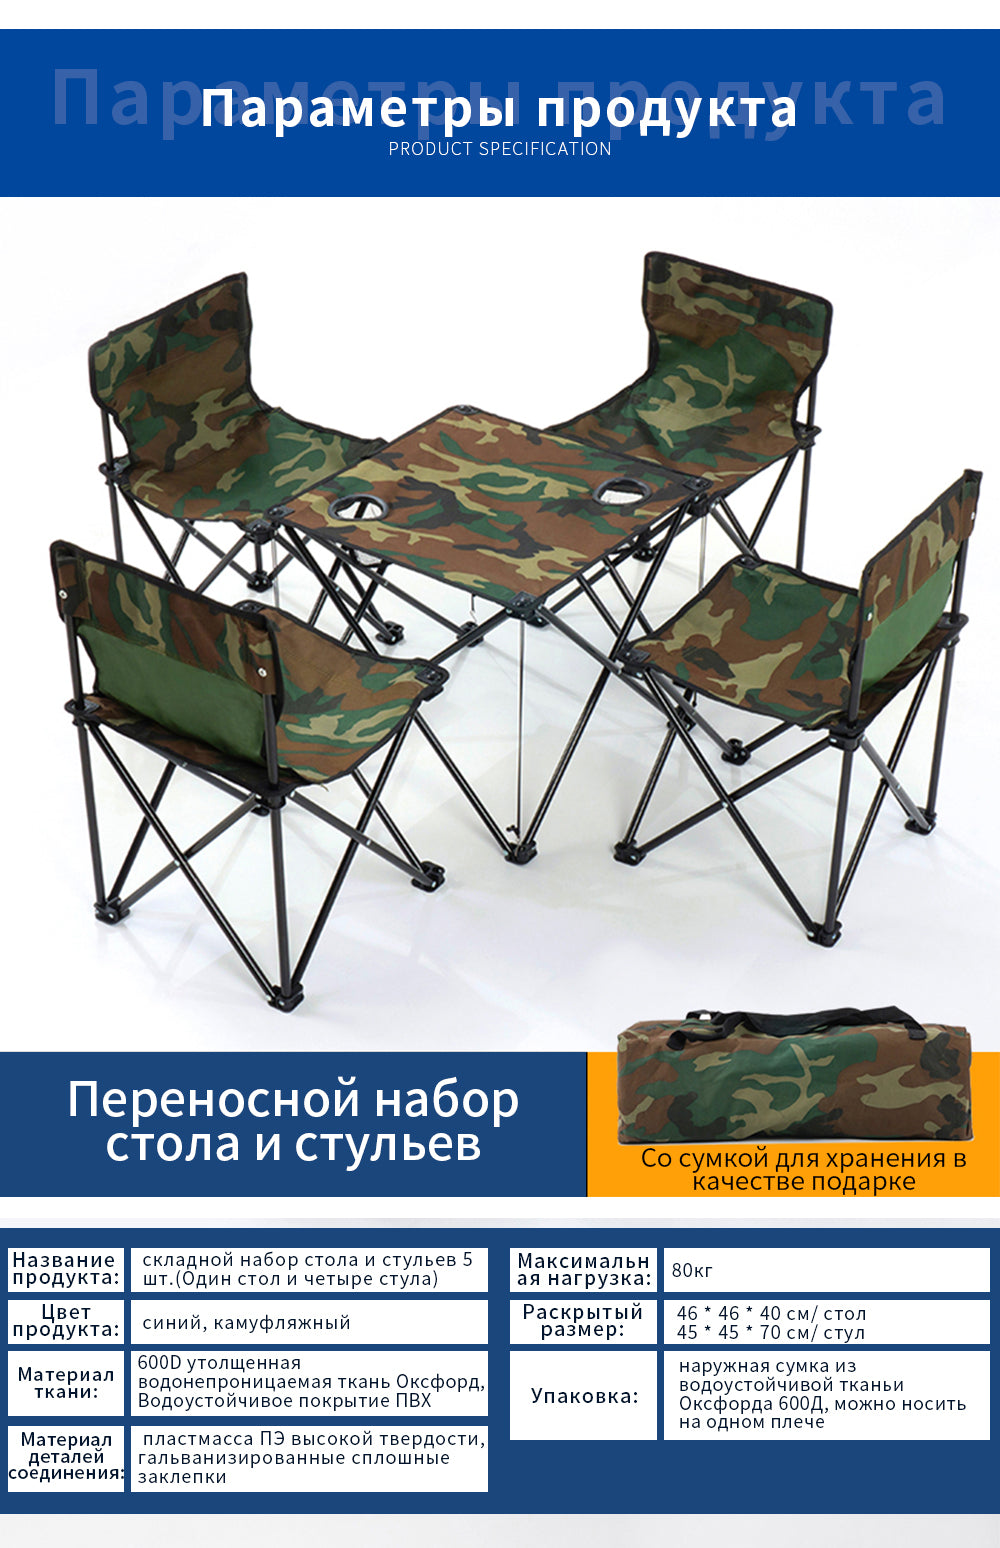 Tactical Lot Import Portable Folding Camping Chair Sets